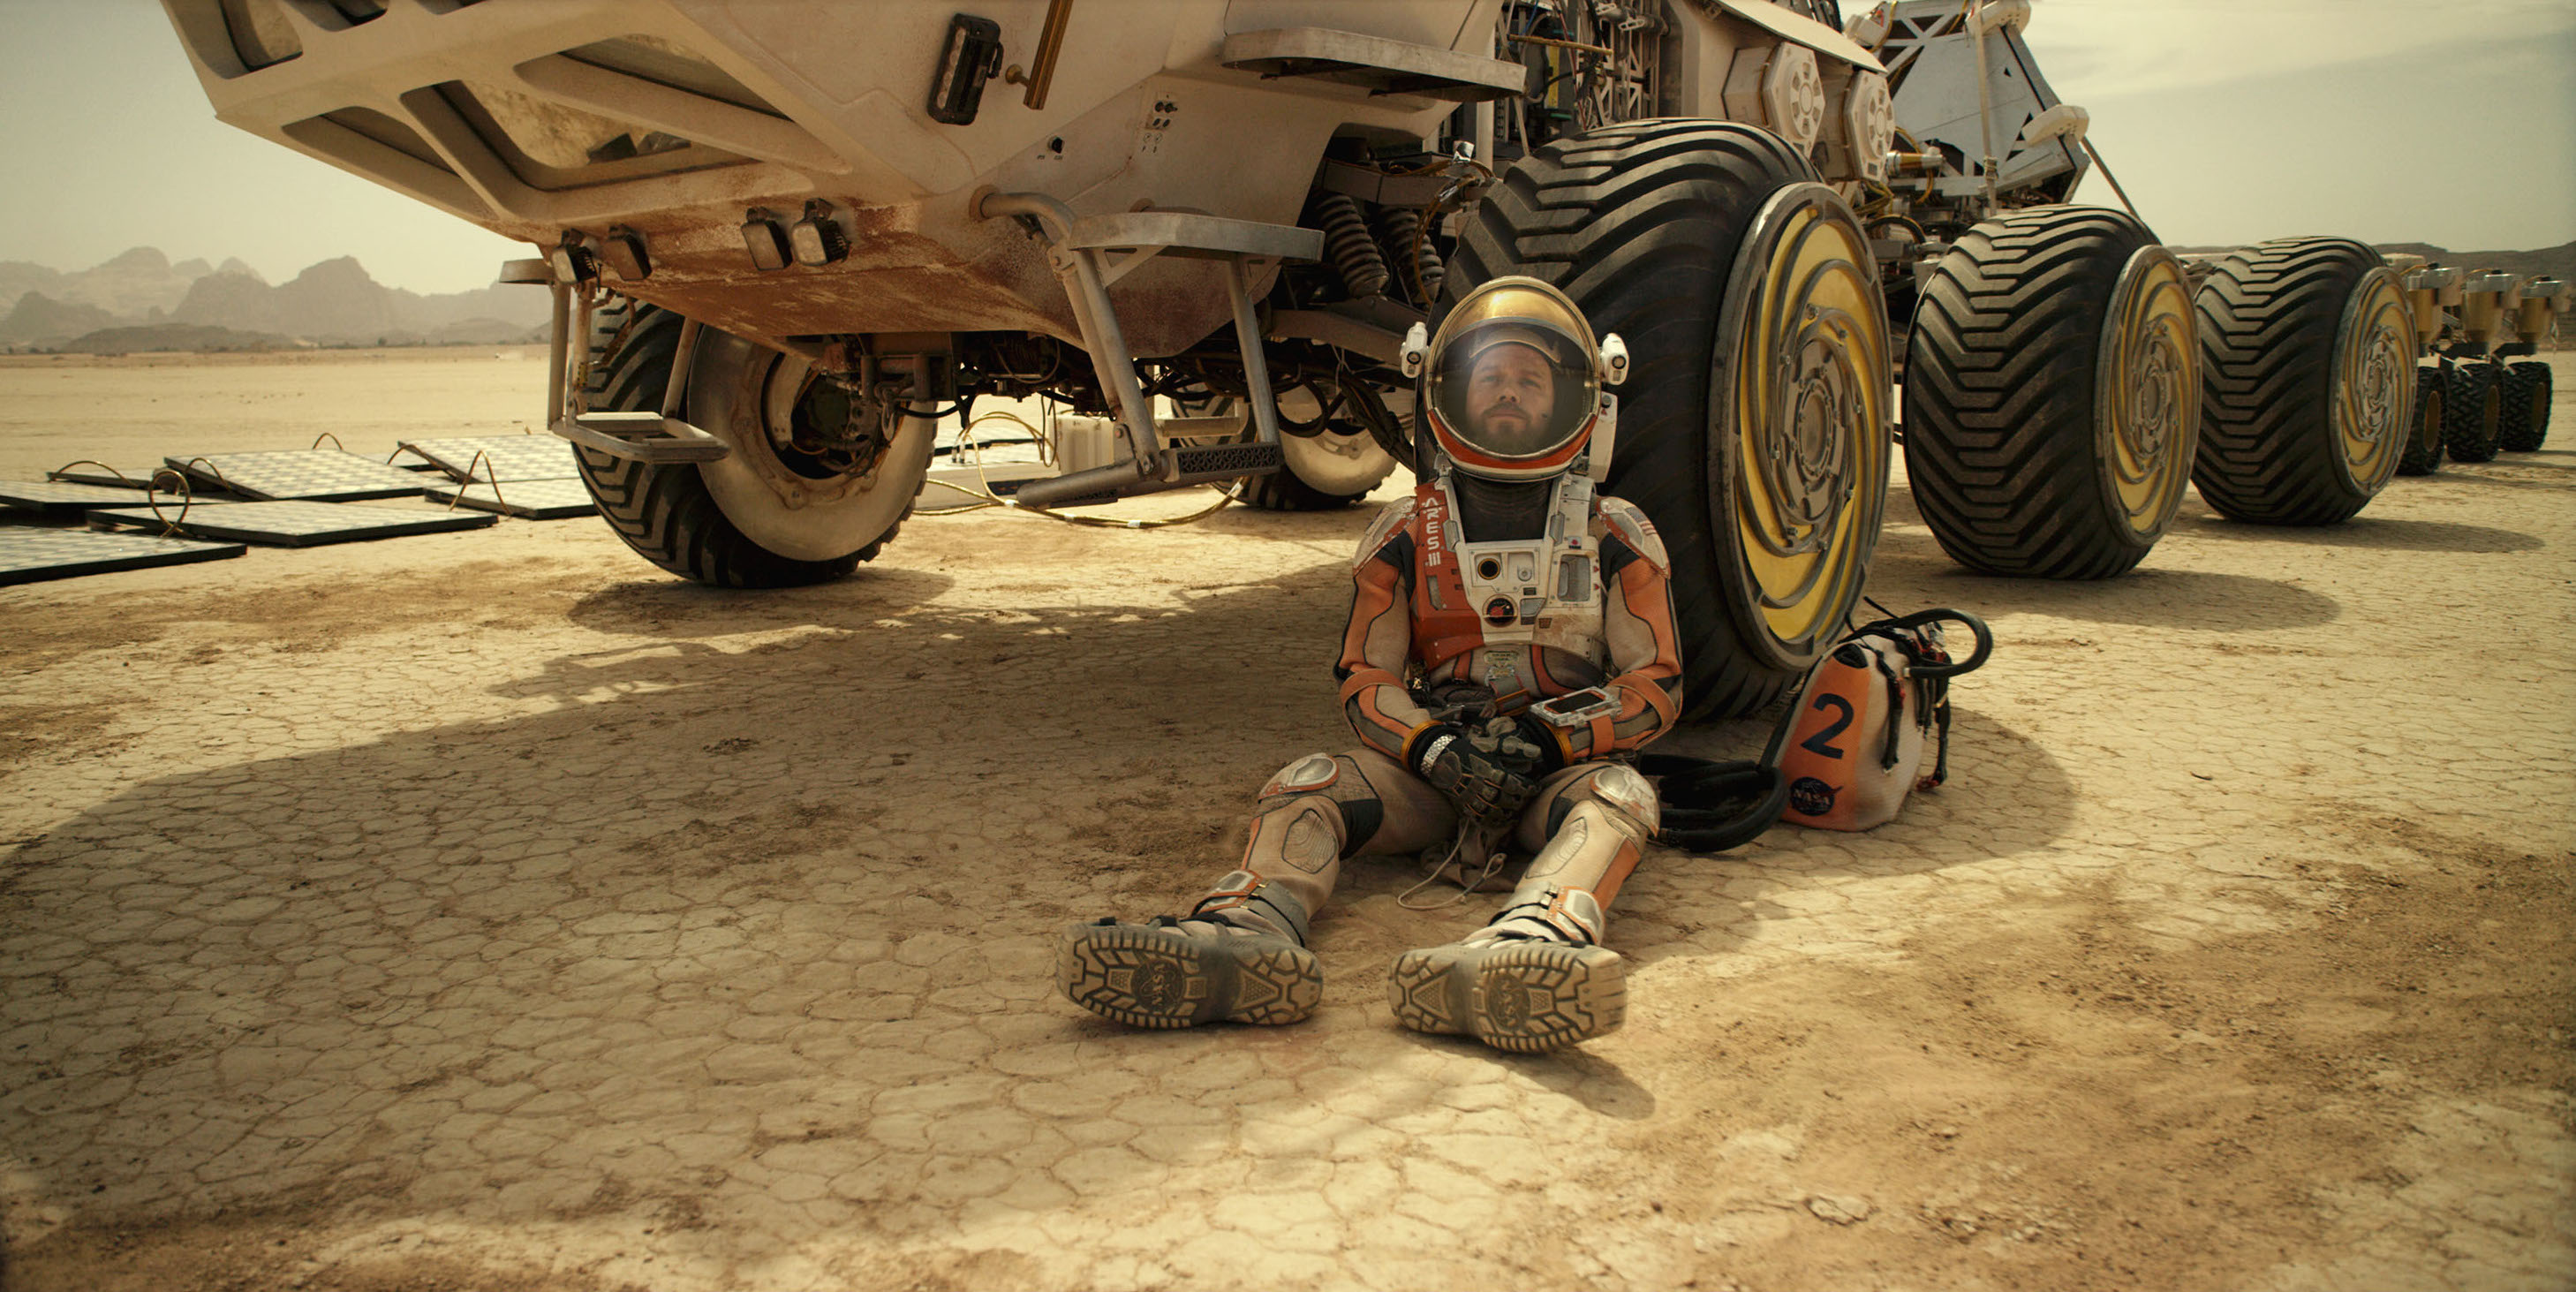 the martian Matt Damon portrays an astronaut who faces seemingly insurmountable odds as he tries to find a way to subsist on a hostile planet.